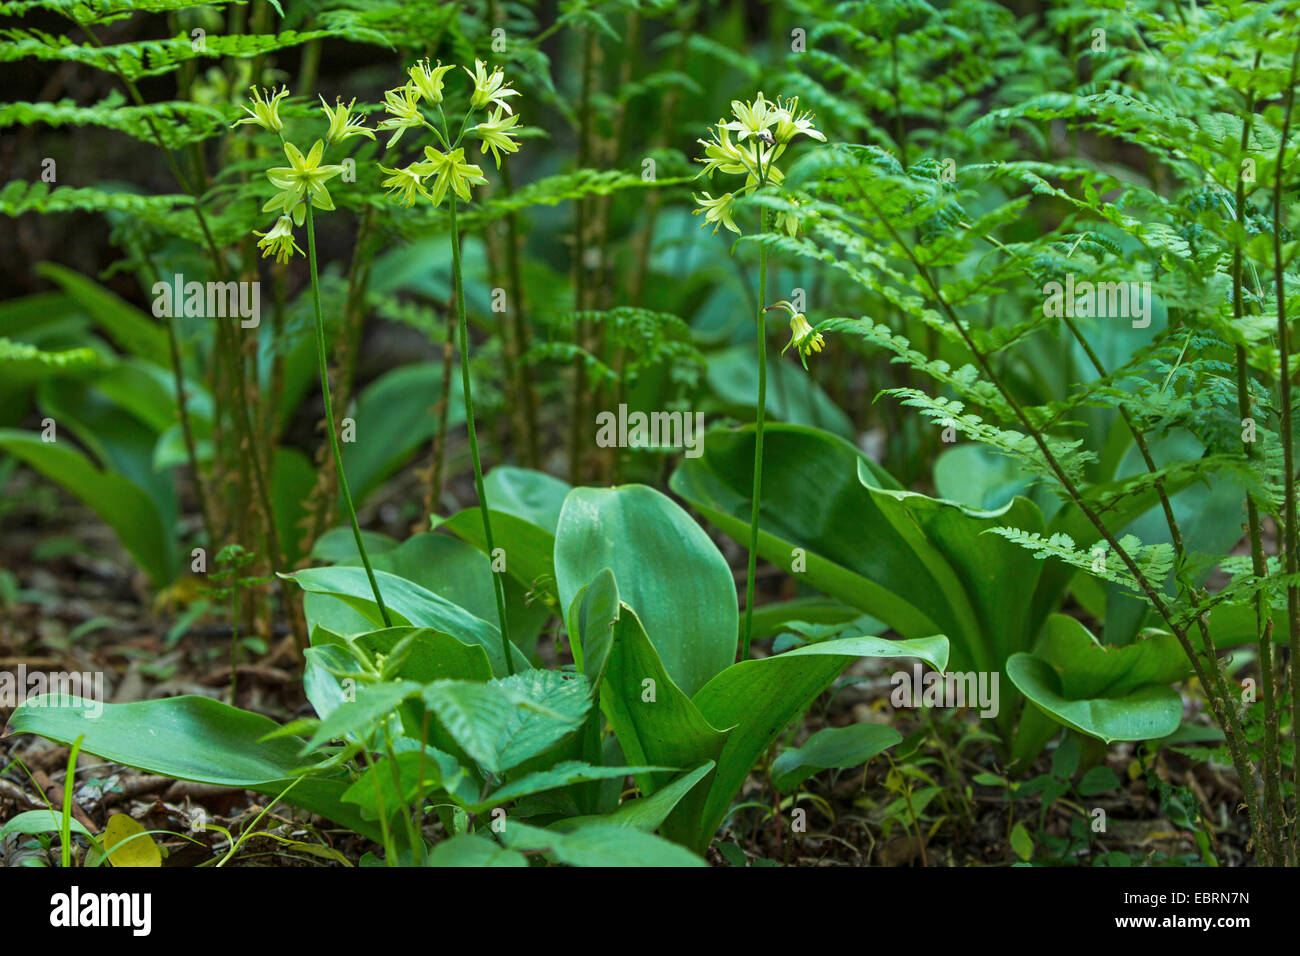 Clinton lily, Bluebead Lily (Clintonia borealis), fioritura, USA, Tennessee, il Parco Nazionale di Great Smoky Mountains Foto Stock